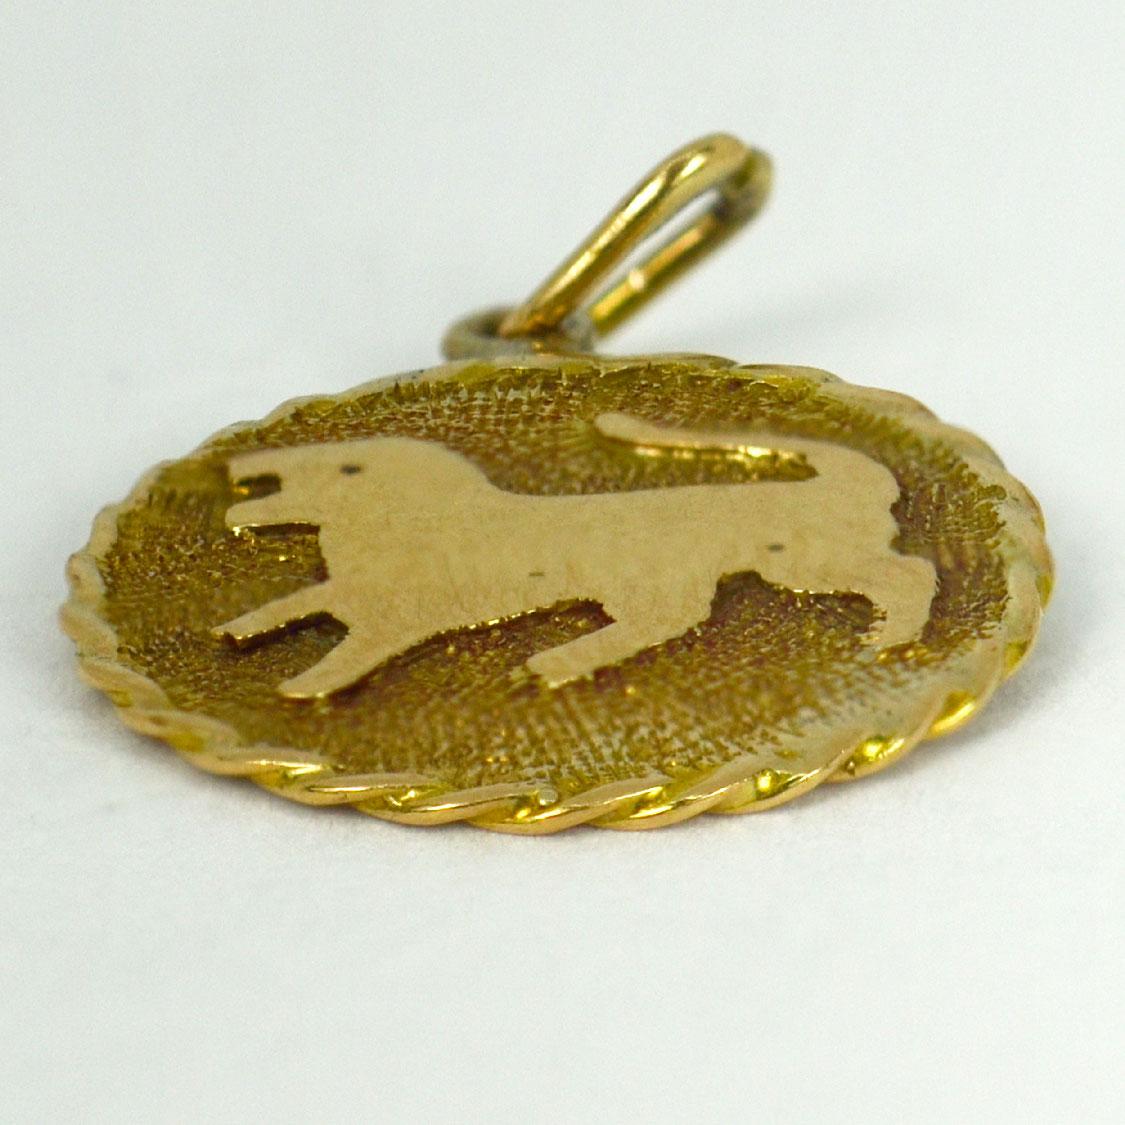 An 18 karat (18K) yellow gold charm pendant designed as a disc depicting a lion to represent the Zodiac sign of Leo. Stamped with the owl mark for French import and 18 karat gold, engraved to the reverse ‘Ma Rosa’.

Dimensions: 1.7 x 1.5 x 0.5 cm